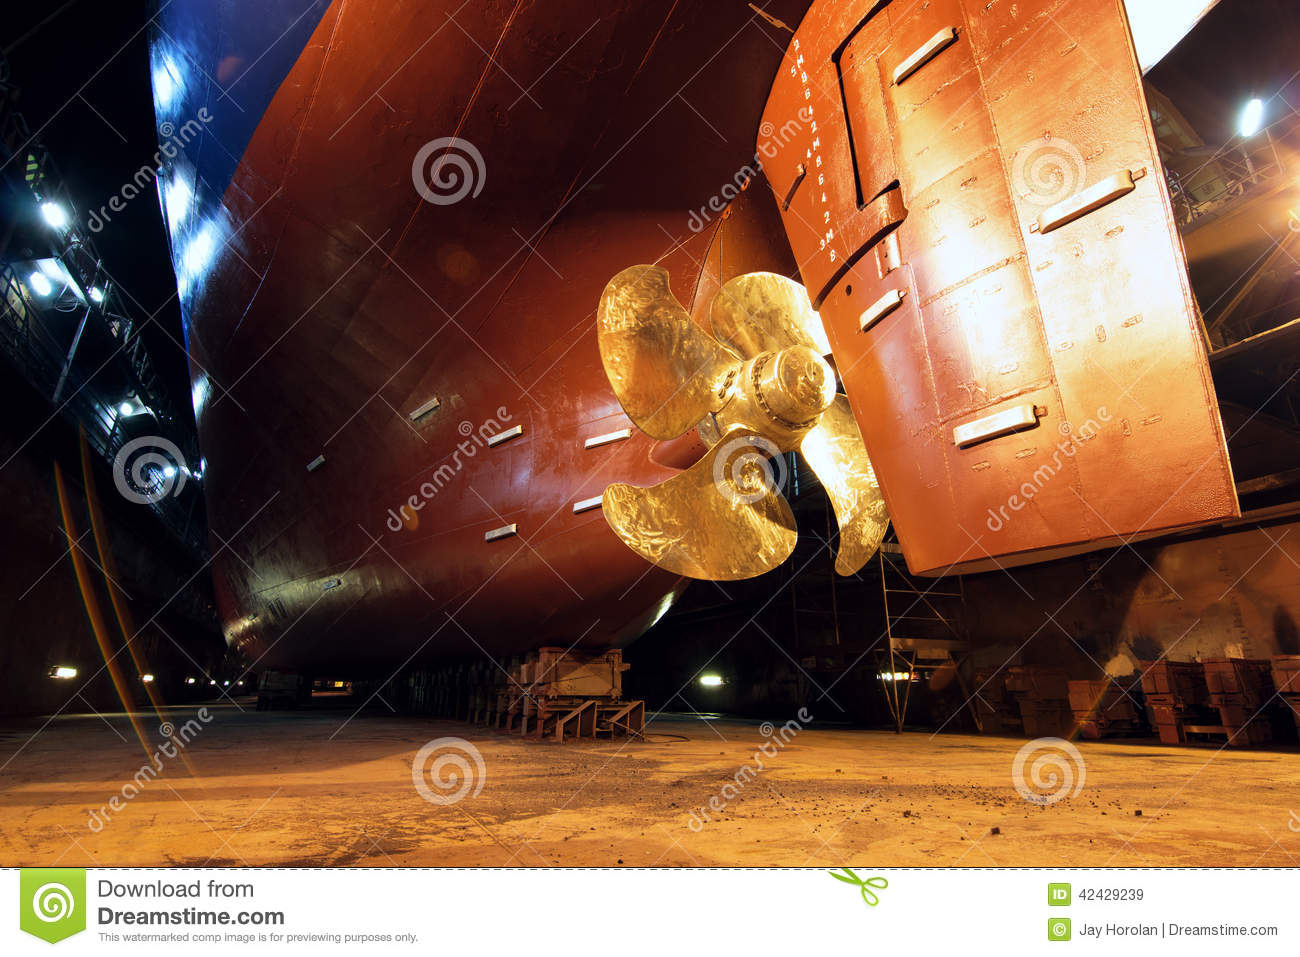 Ship Propeller And Rudder With The View From The Bottom Part Of The